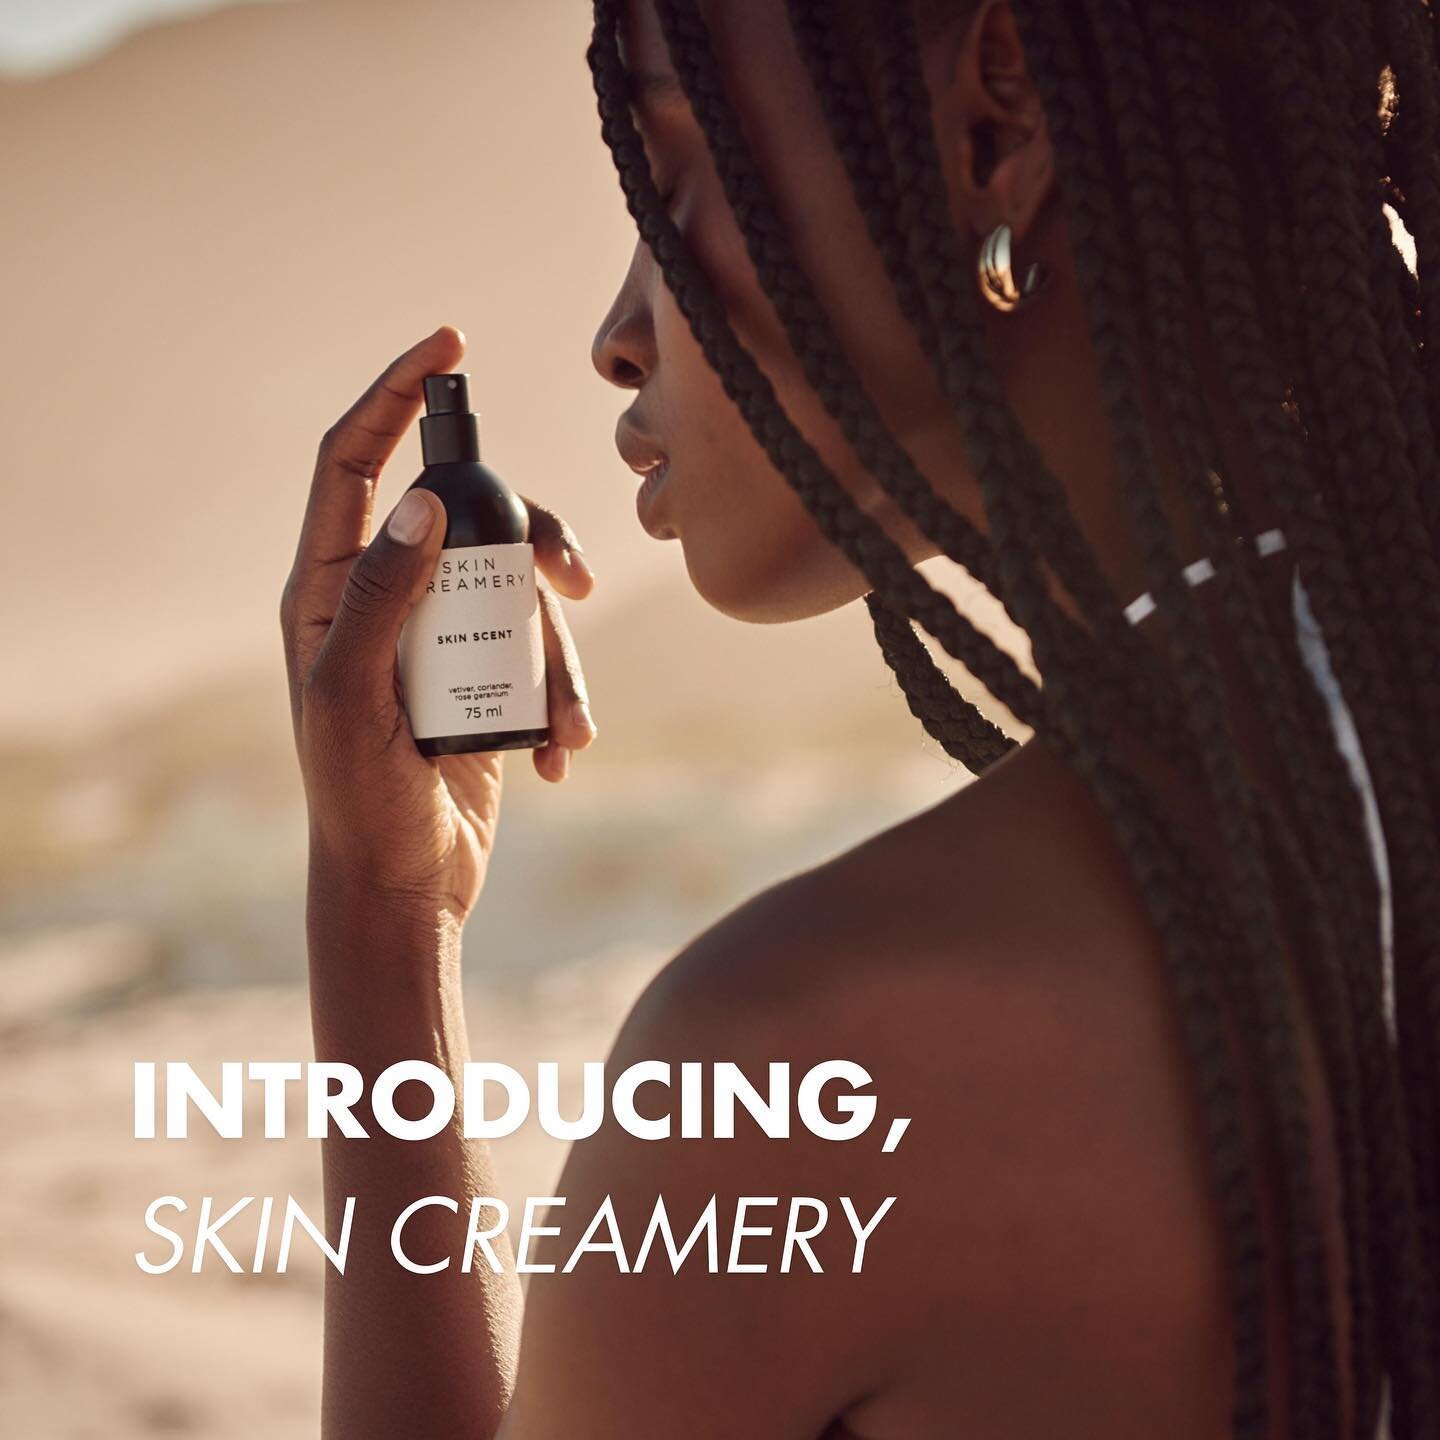 Introducing MOOD&rsquo;s newest client, @skincreamery ✨ Known for being kind to your skin *and* to the earth, this brand is a local cult classic and we're so excited for what we have in store with them! For more on all things skin, keep an eye out on